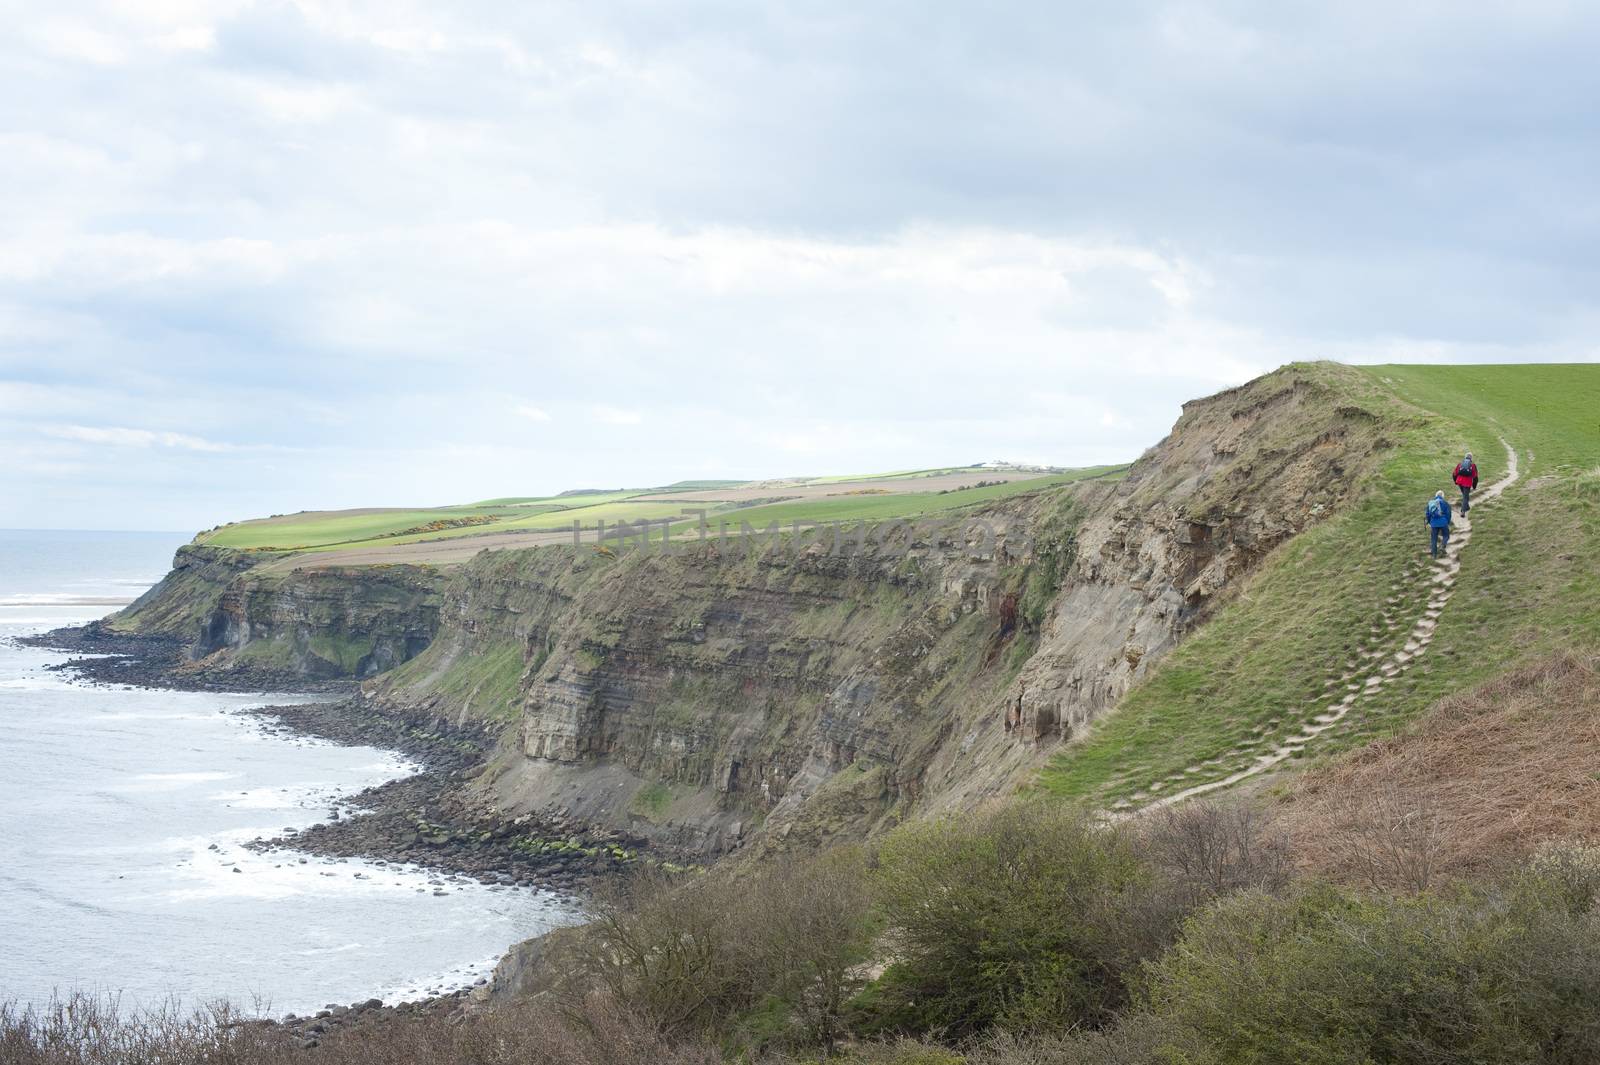 Footpath along the top of coastal cliffs overlooking a calm ocean on an overcast day in a scenic landscape view